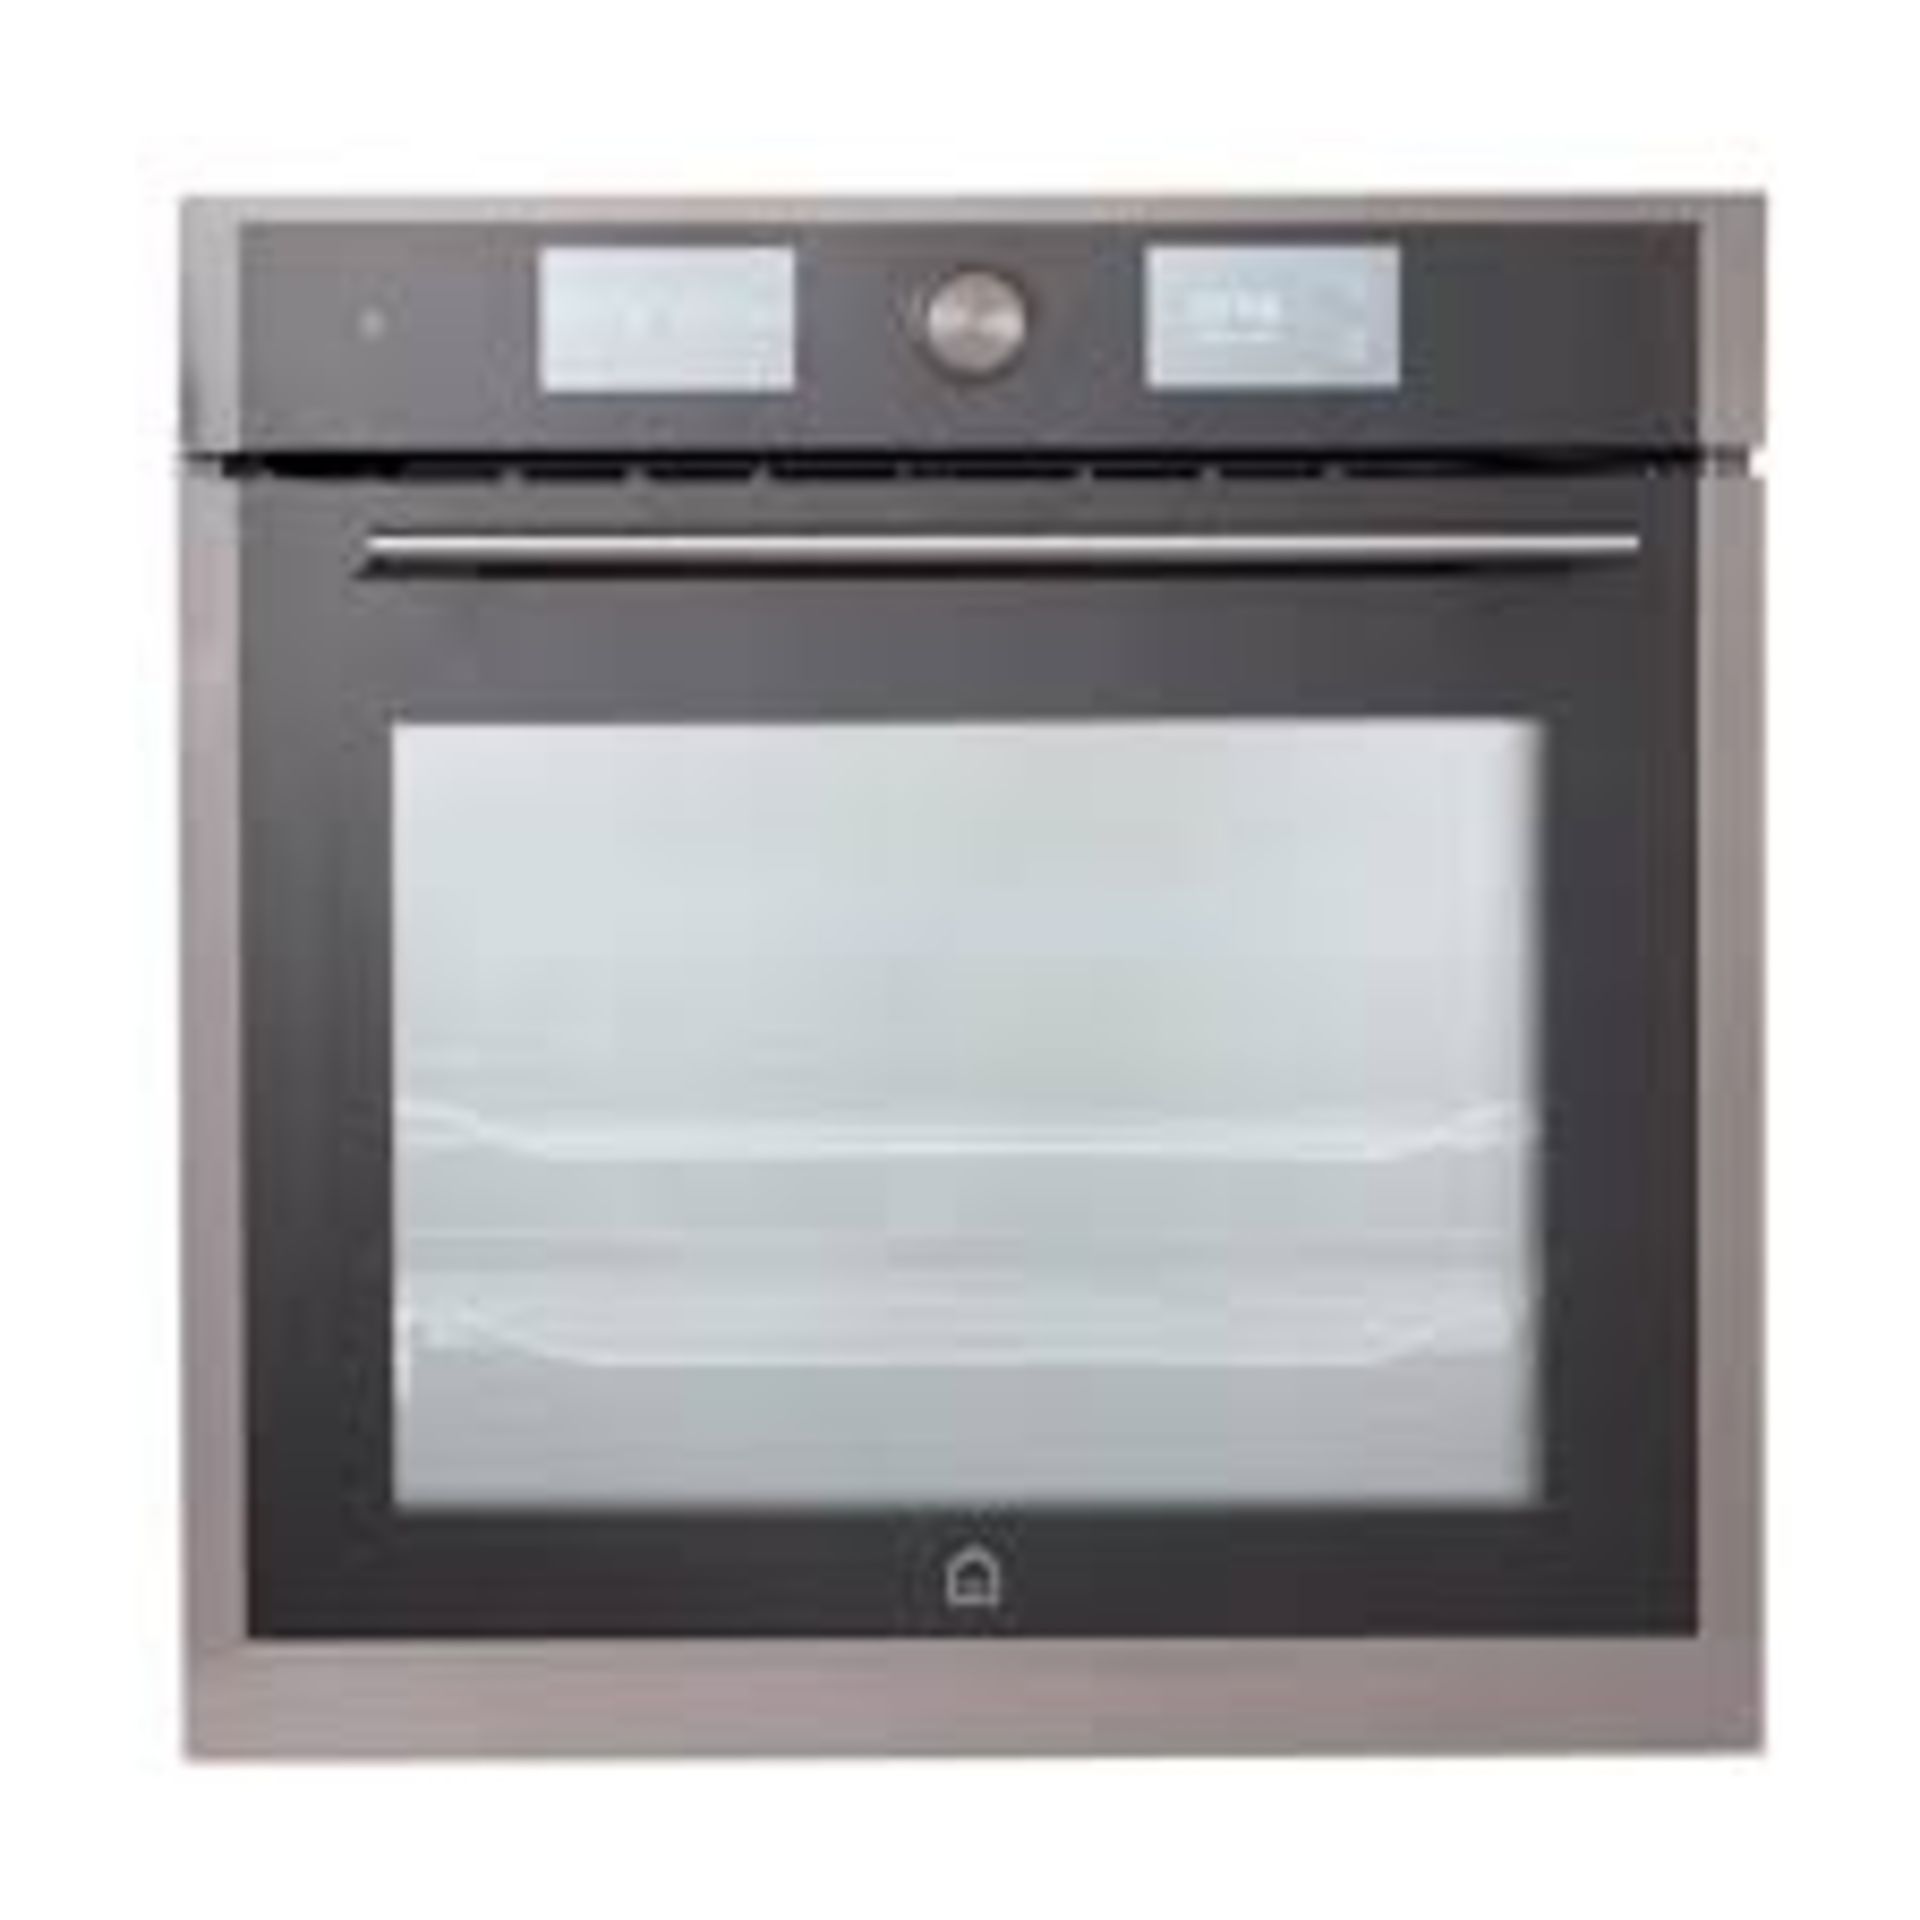 GoodHome Ghpy71 Built-In Single Pyrolytic Oven - Brushed Black. R19.